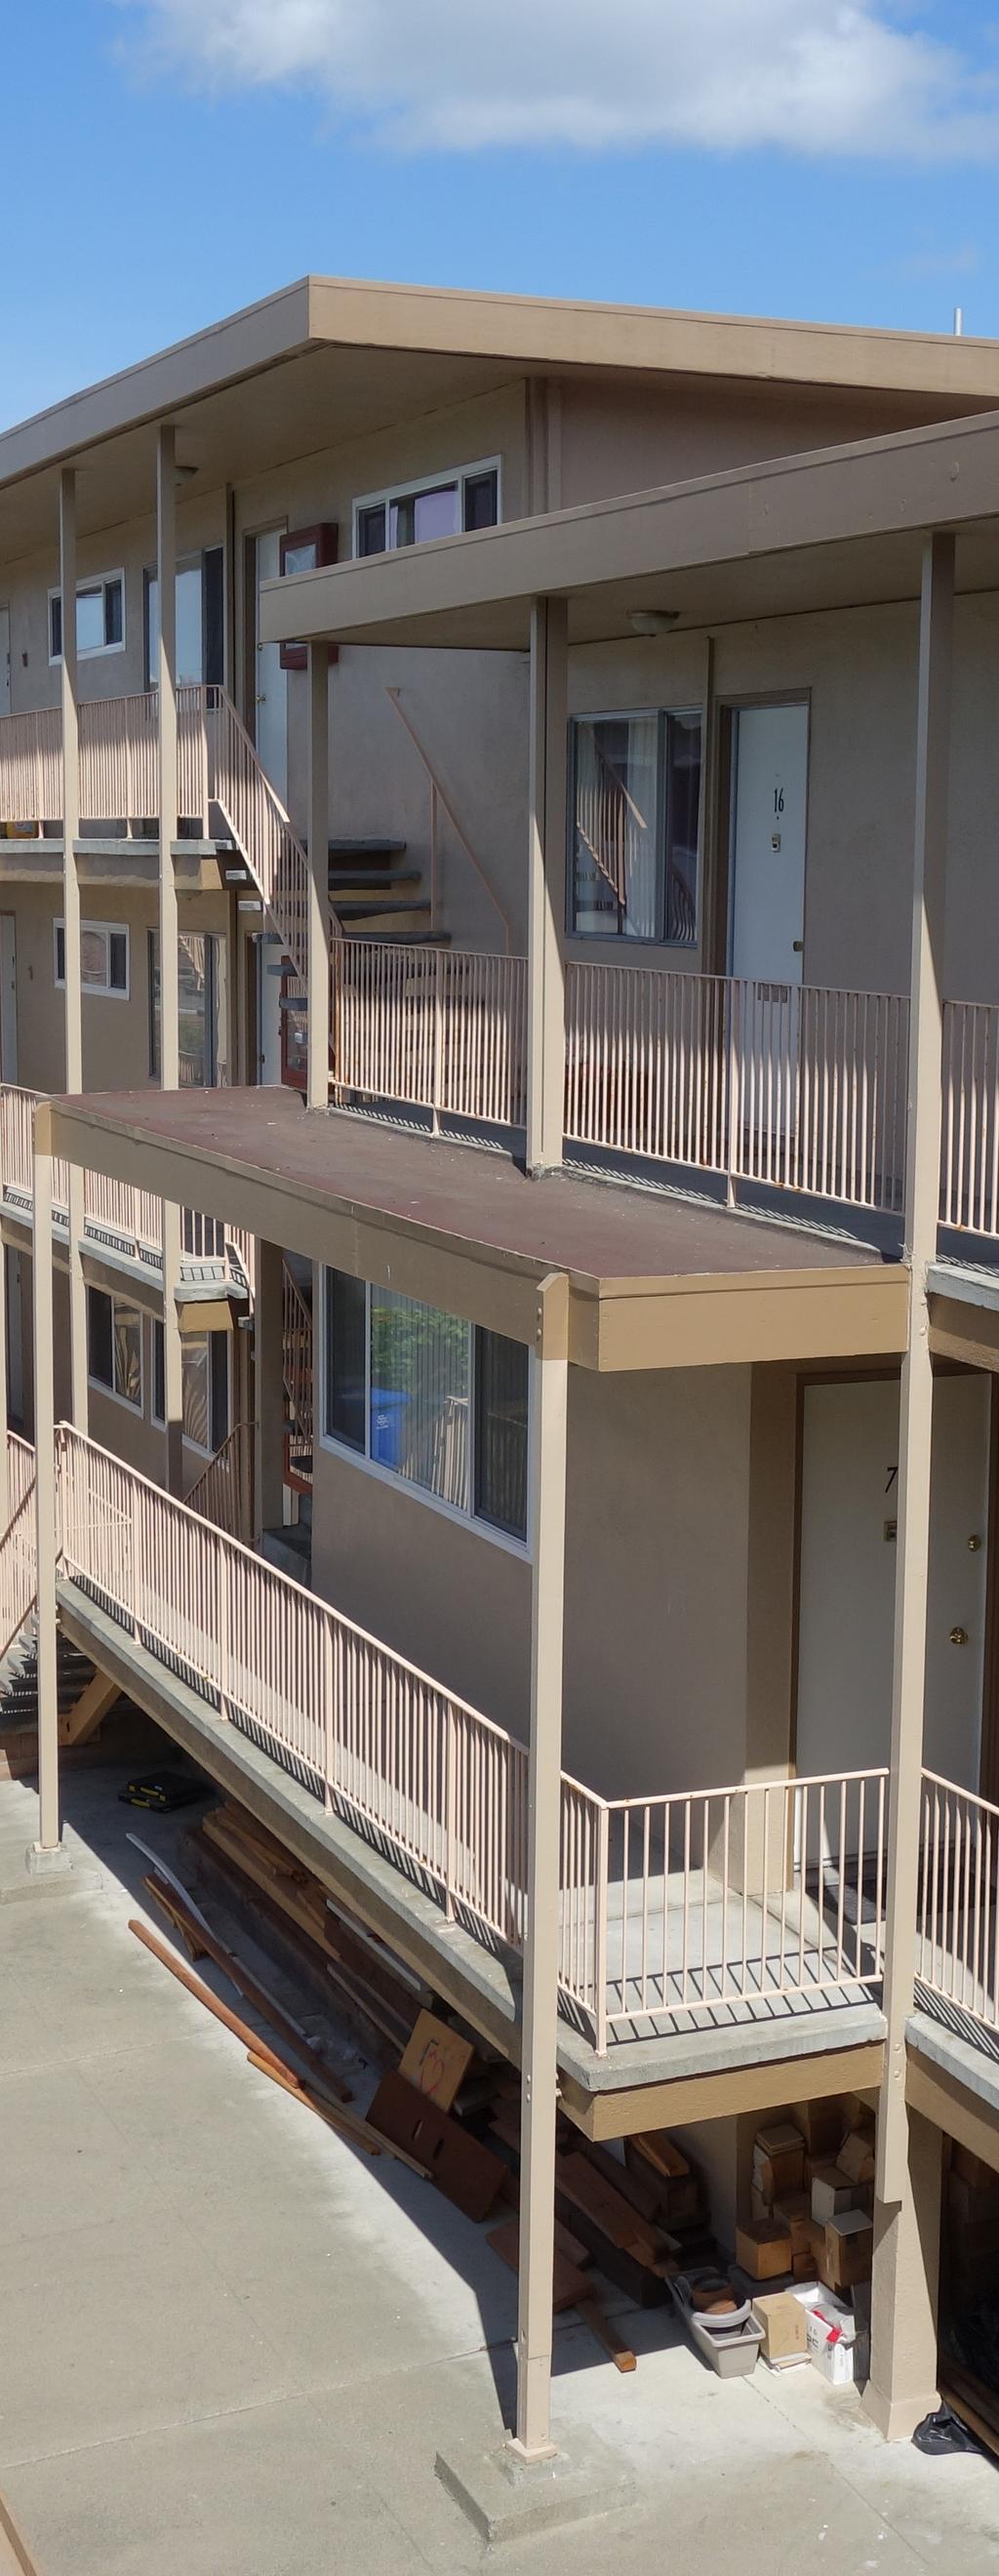 Property Highlights LOCATION: 1300 El Camino Real, Millbrae, CA 94030 > Rarely Available, Pride of Ownership, 18-Unit Property in the Heart of Millbrae - Low Velocity Market > Excellent, AAA Location